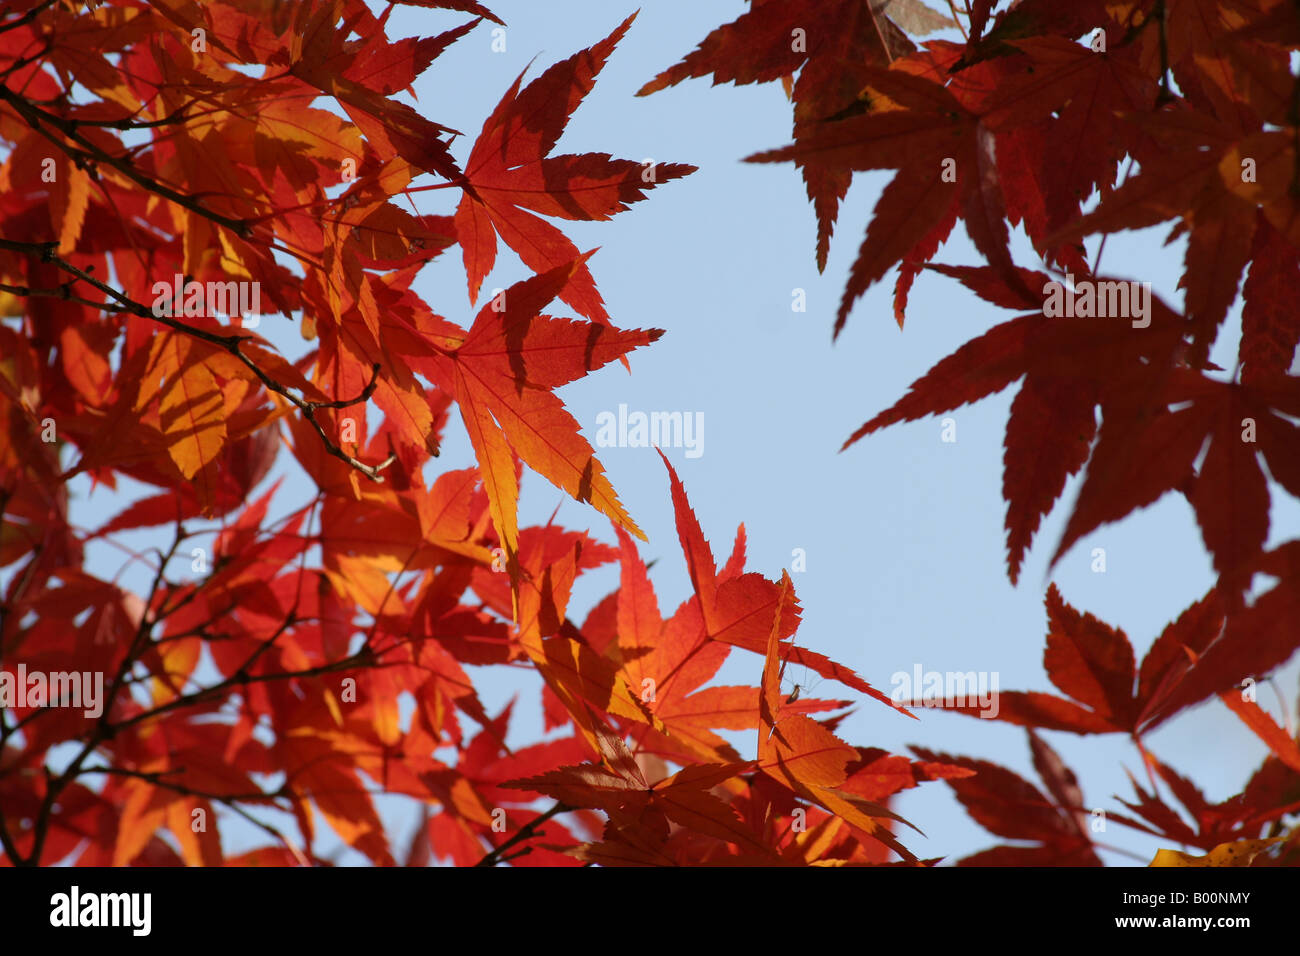 Red leaves of a Japanese maple (Acer palmatum) against a blue sky. Stock Photo